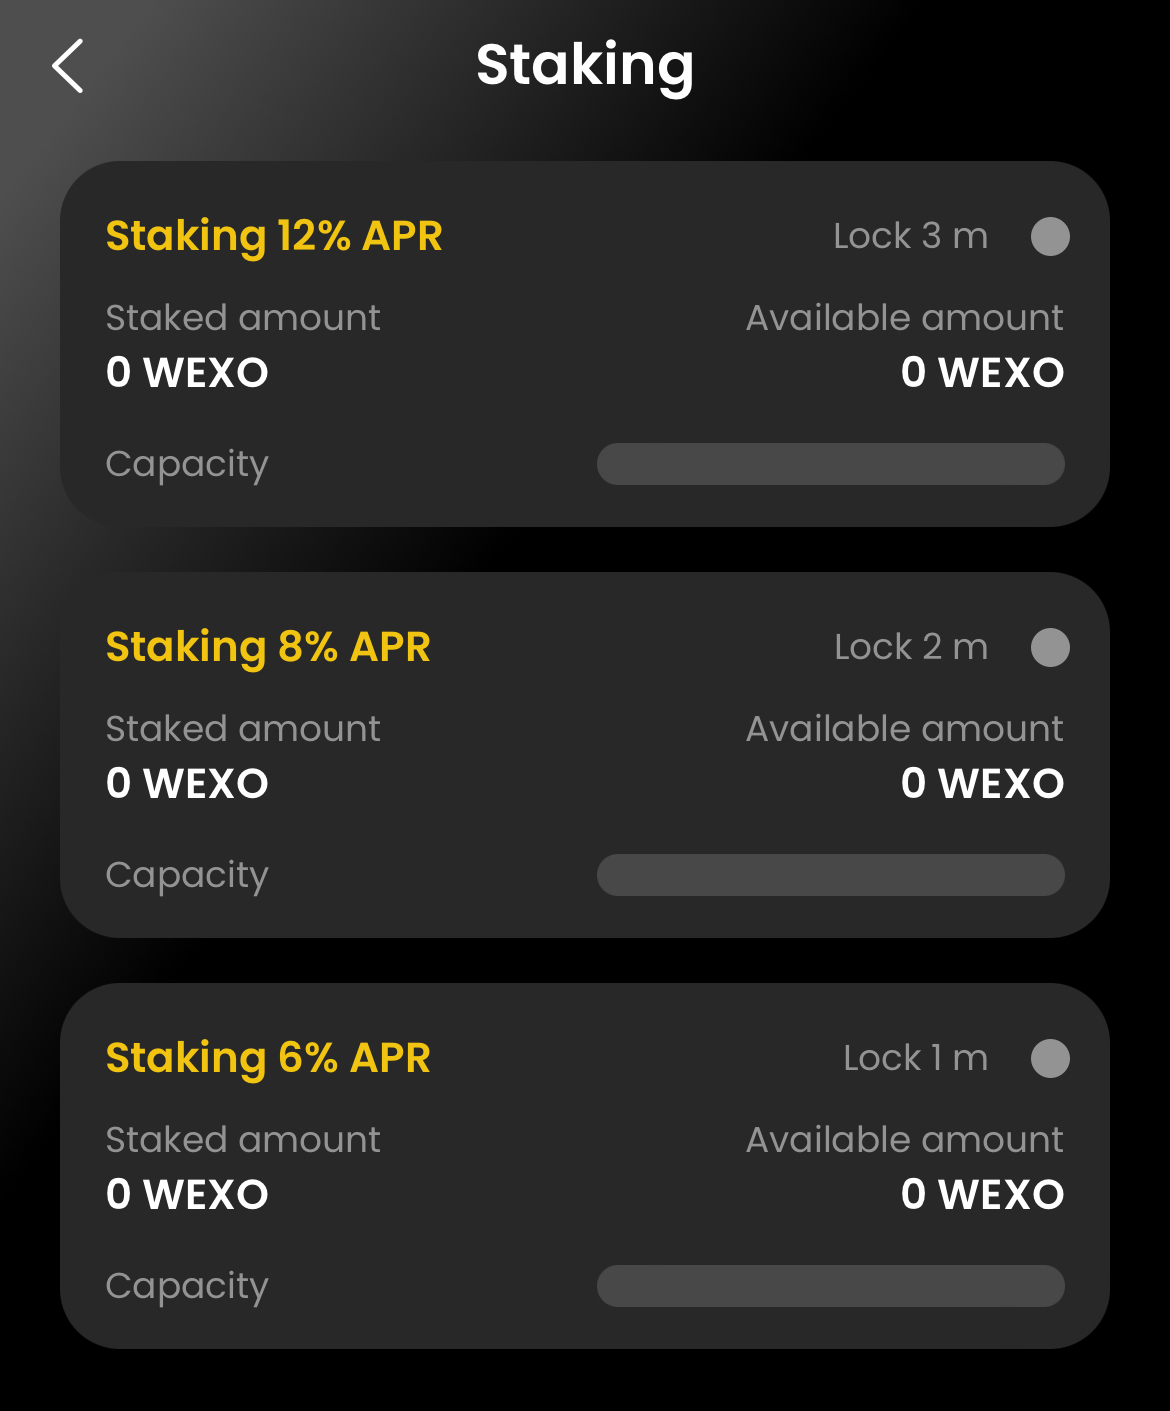 Staking pools